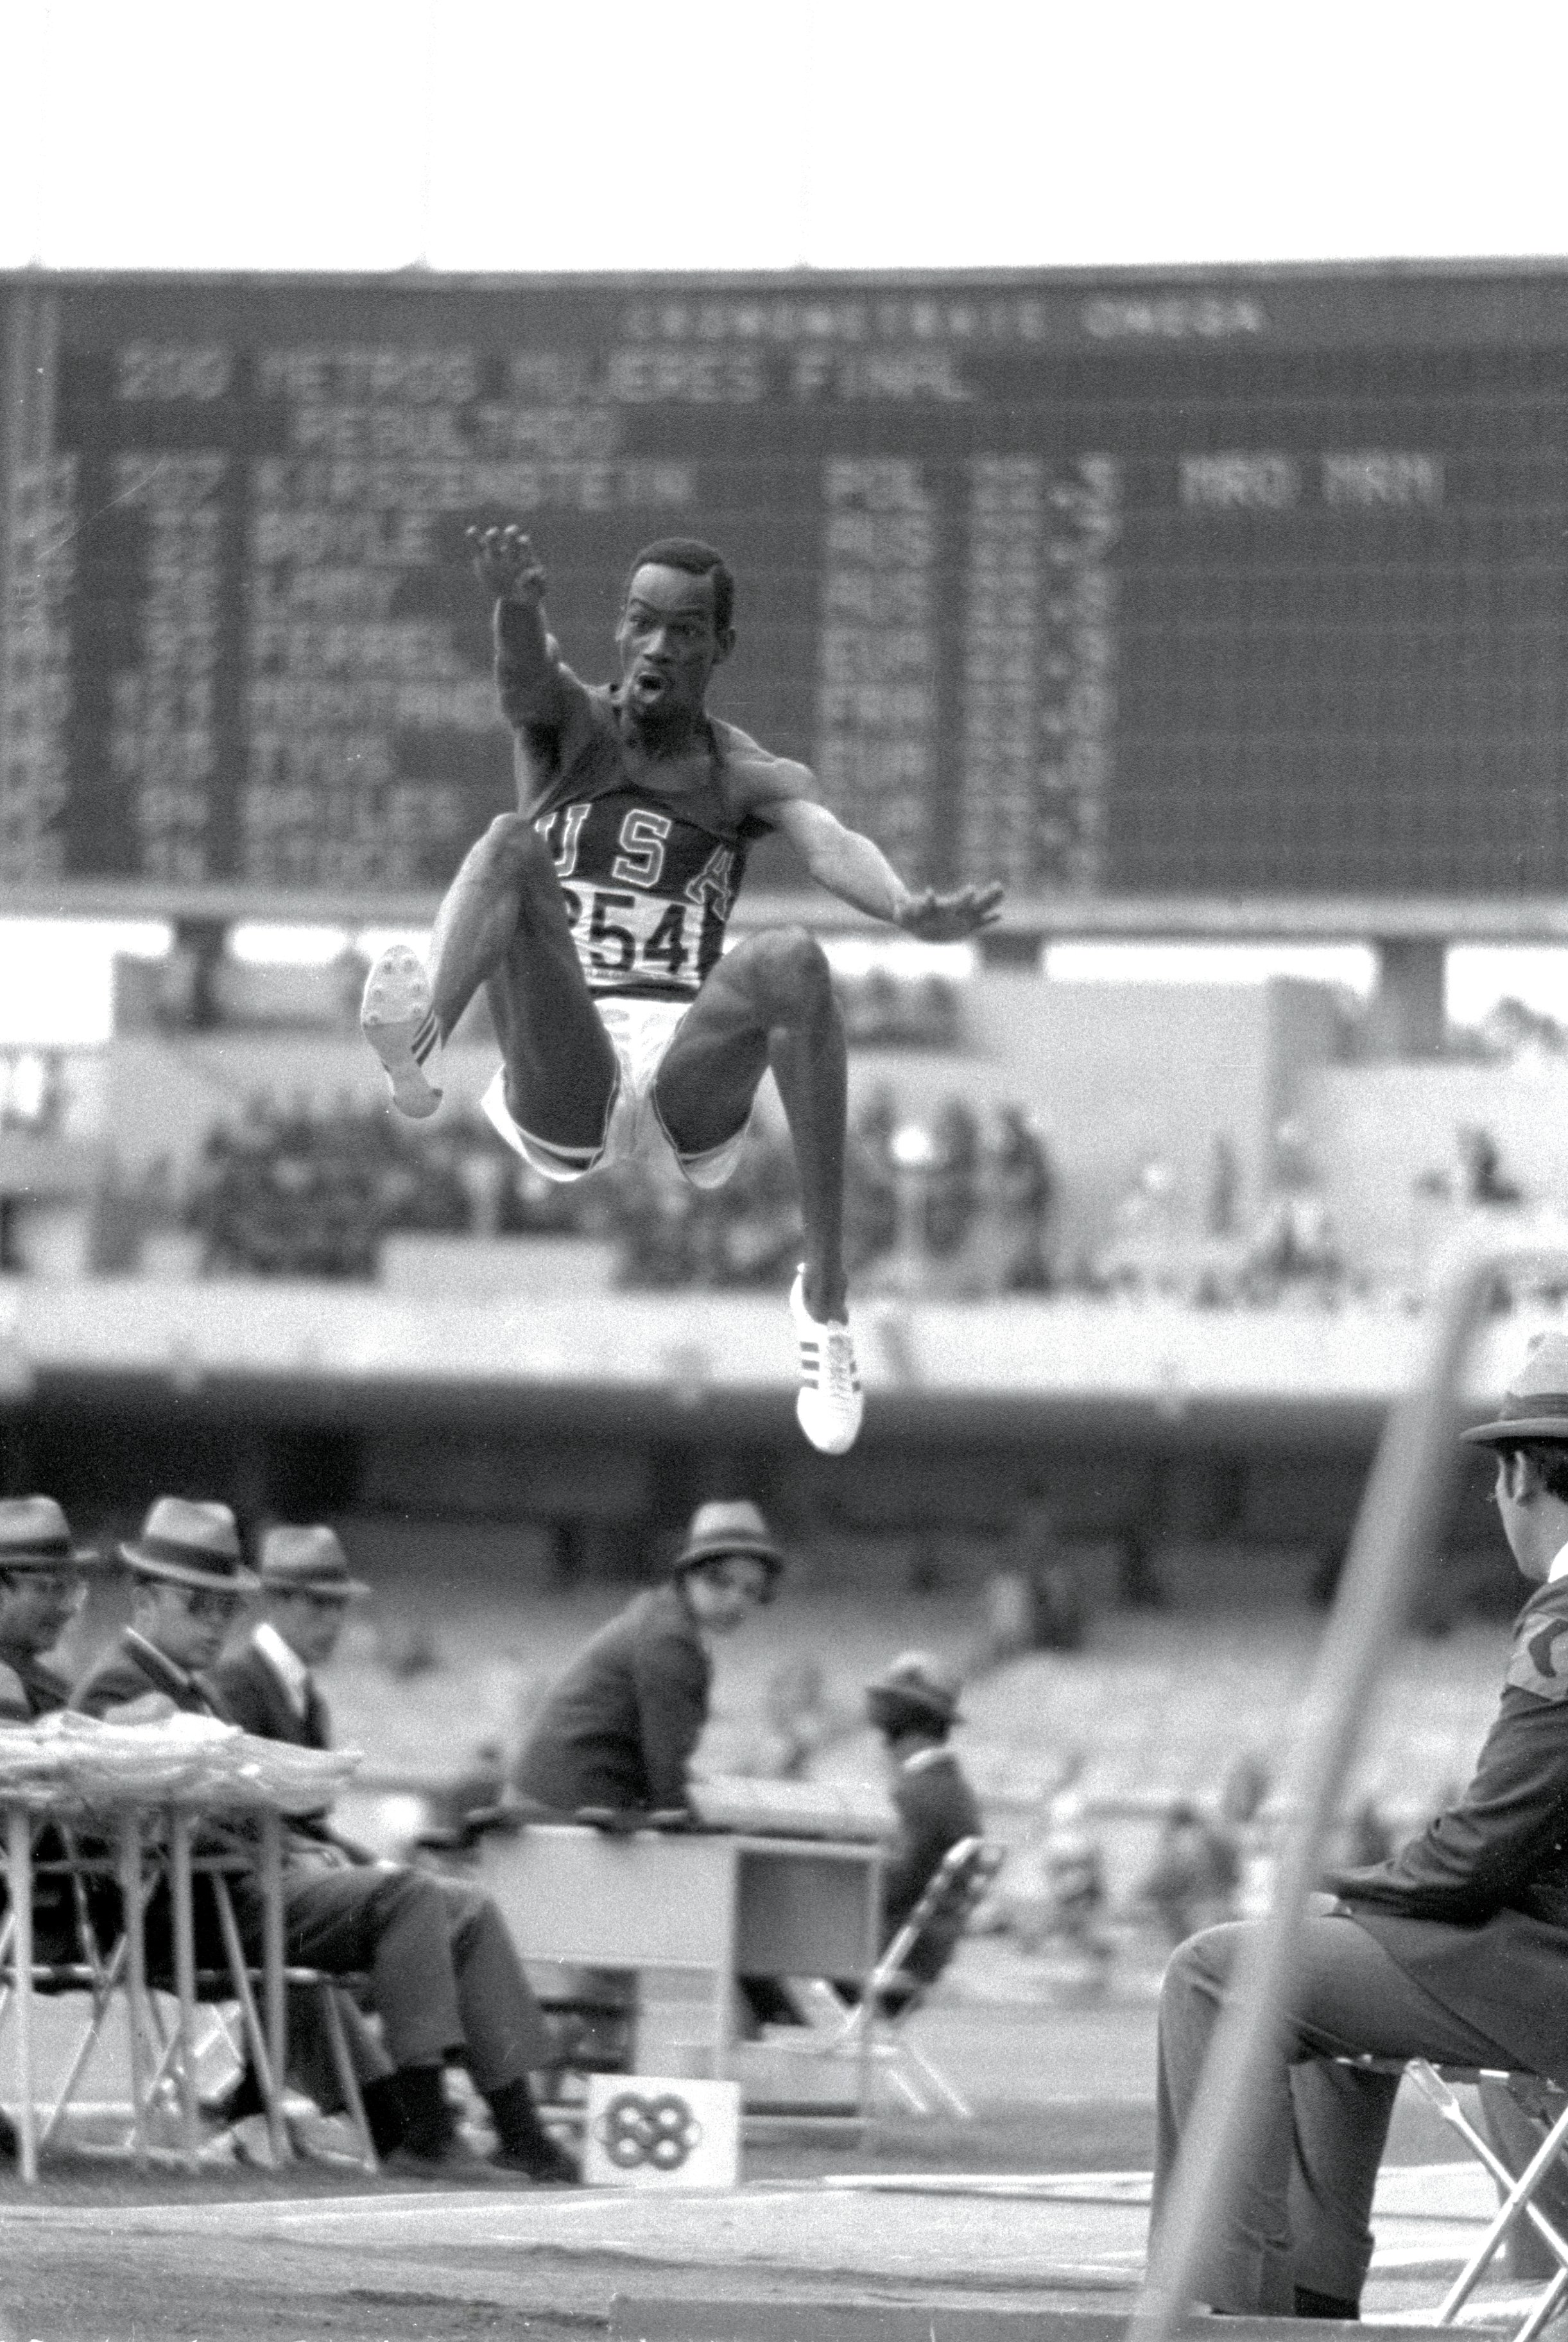 18 Oct 1968: Bob Beamon #254 of the USA breaking the Long Jump World Record during the 1968 Olympic Games in Mexico City, Mexico. Beamon long jumped 8.9 m (29 ft 2 1/2 in), winning the gold medal and setting a new world record. It is the first jump over 2